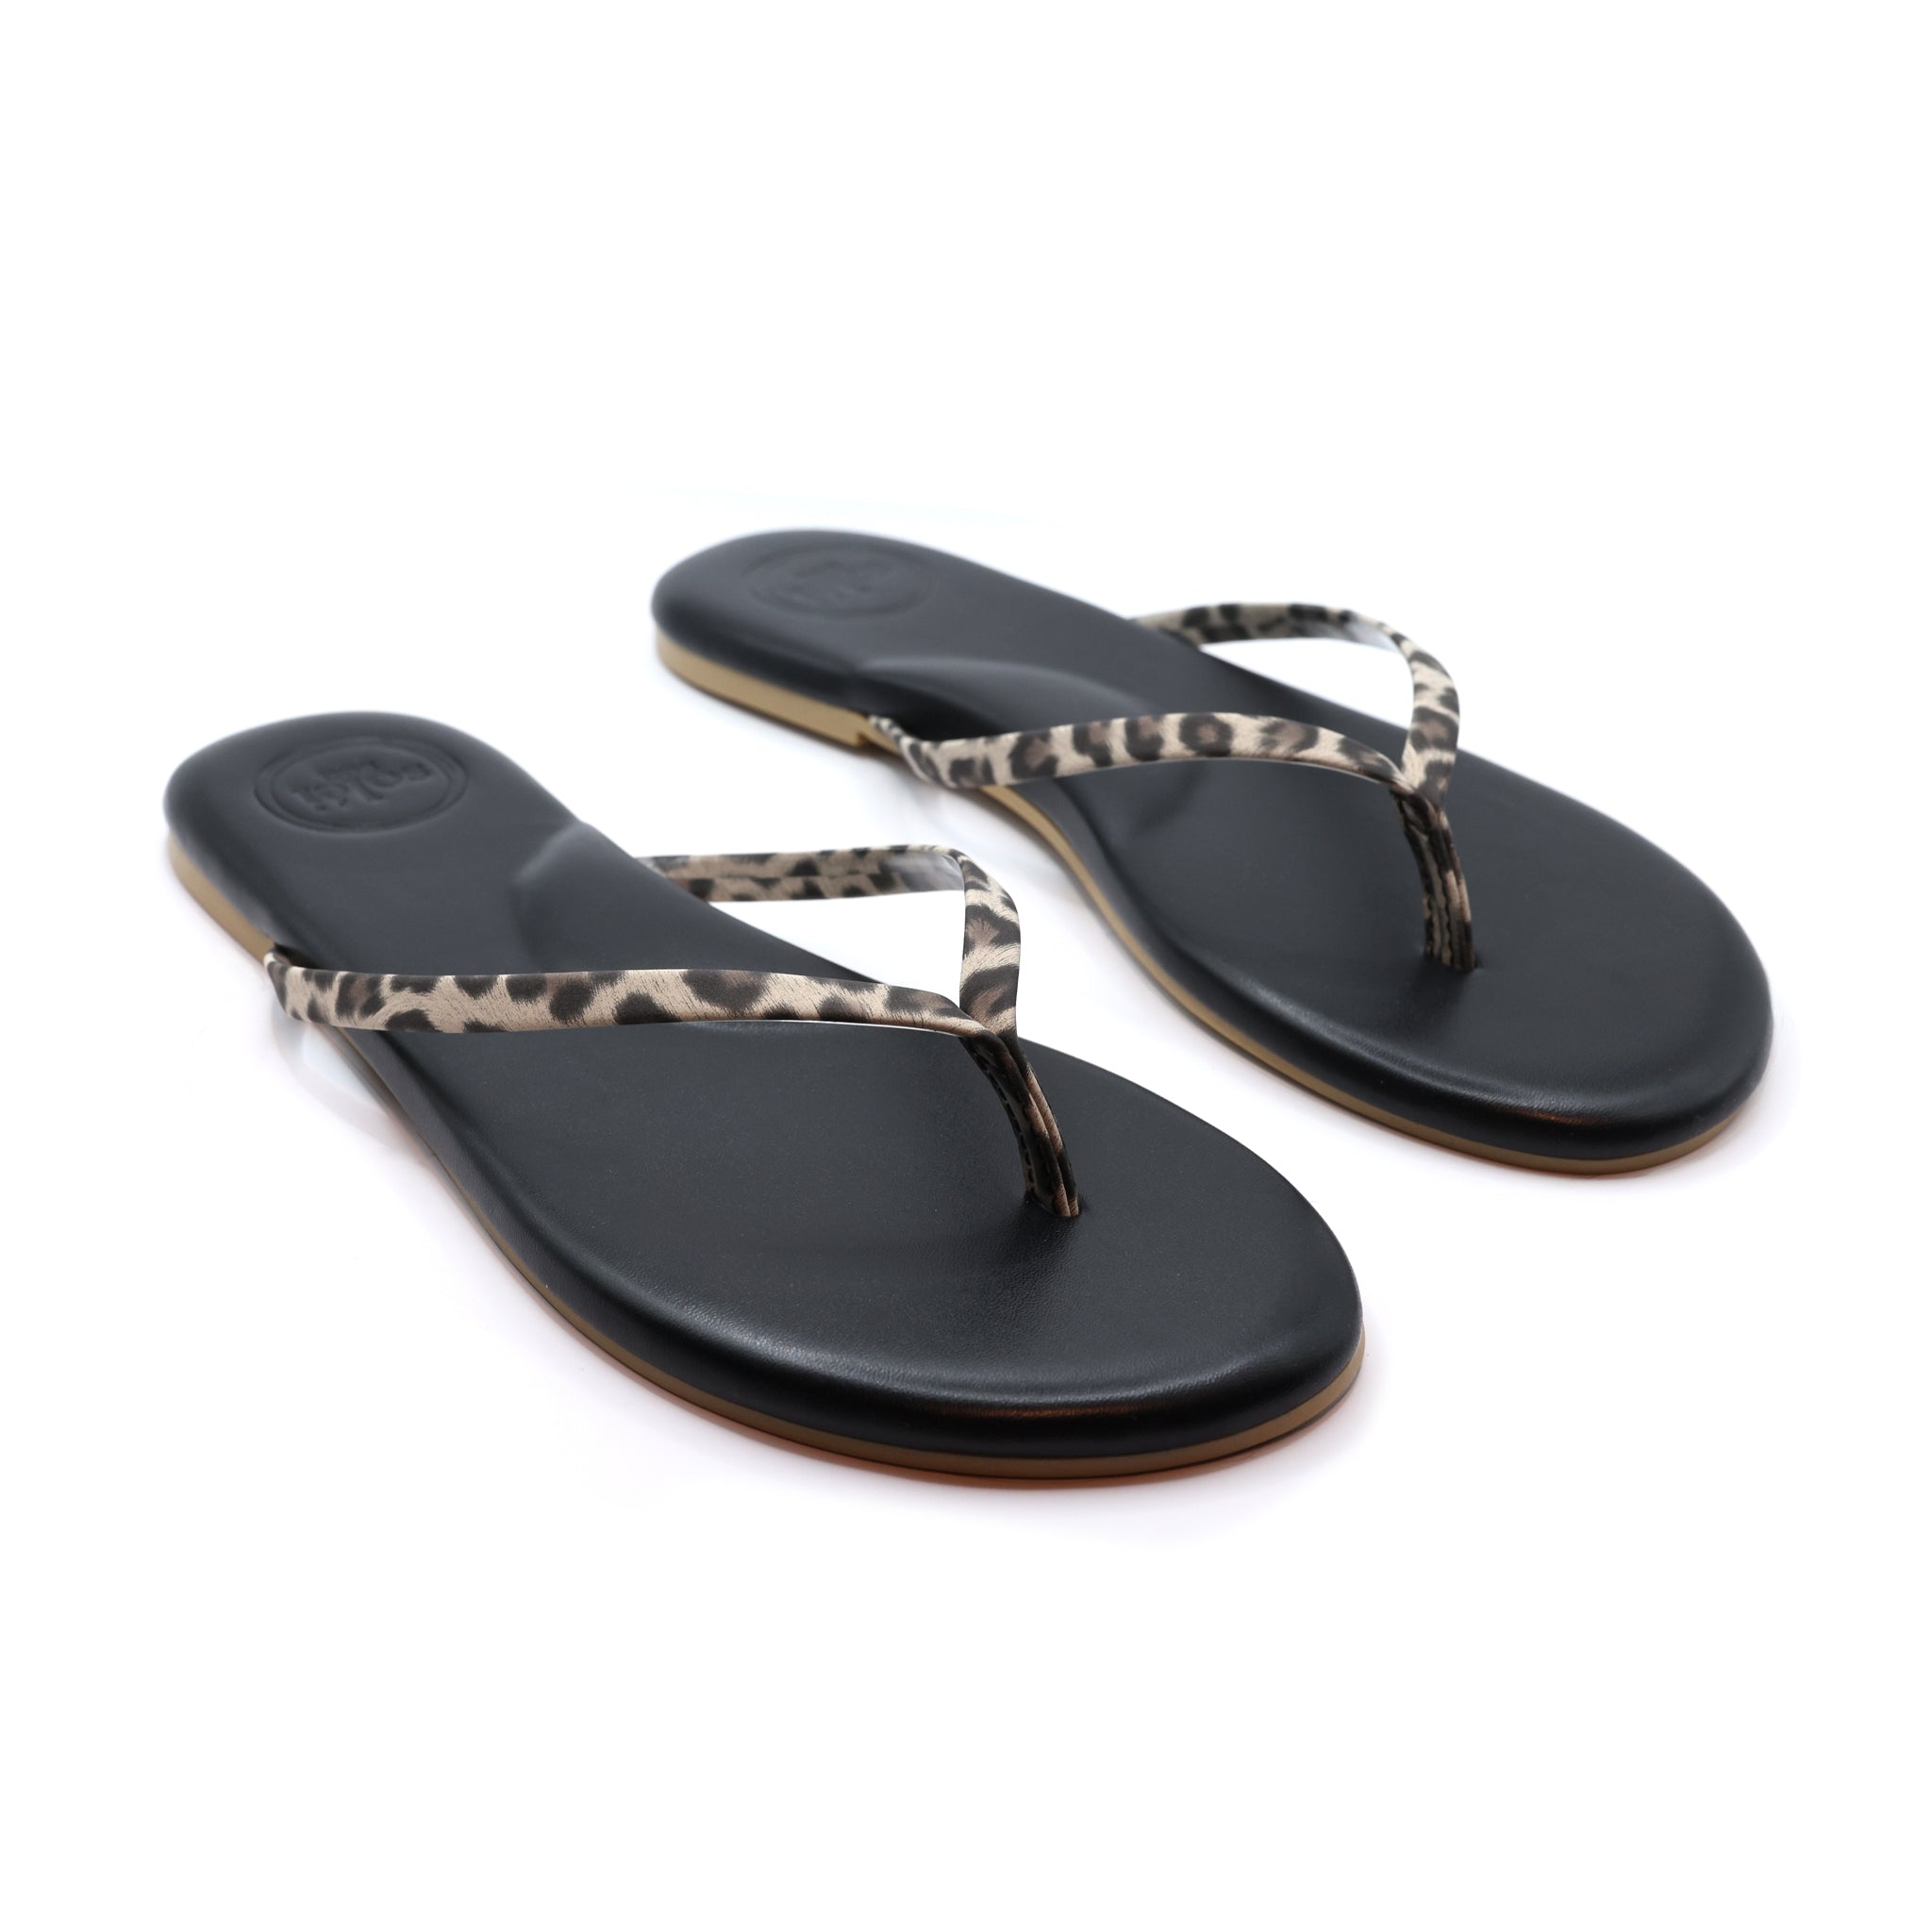 Indie Flip Flop Sandal for women with black footbed and leopard print thin straps. Arch support and rubber outsole for ultimate comfort and style